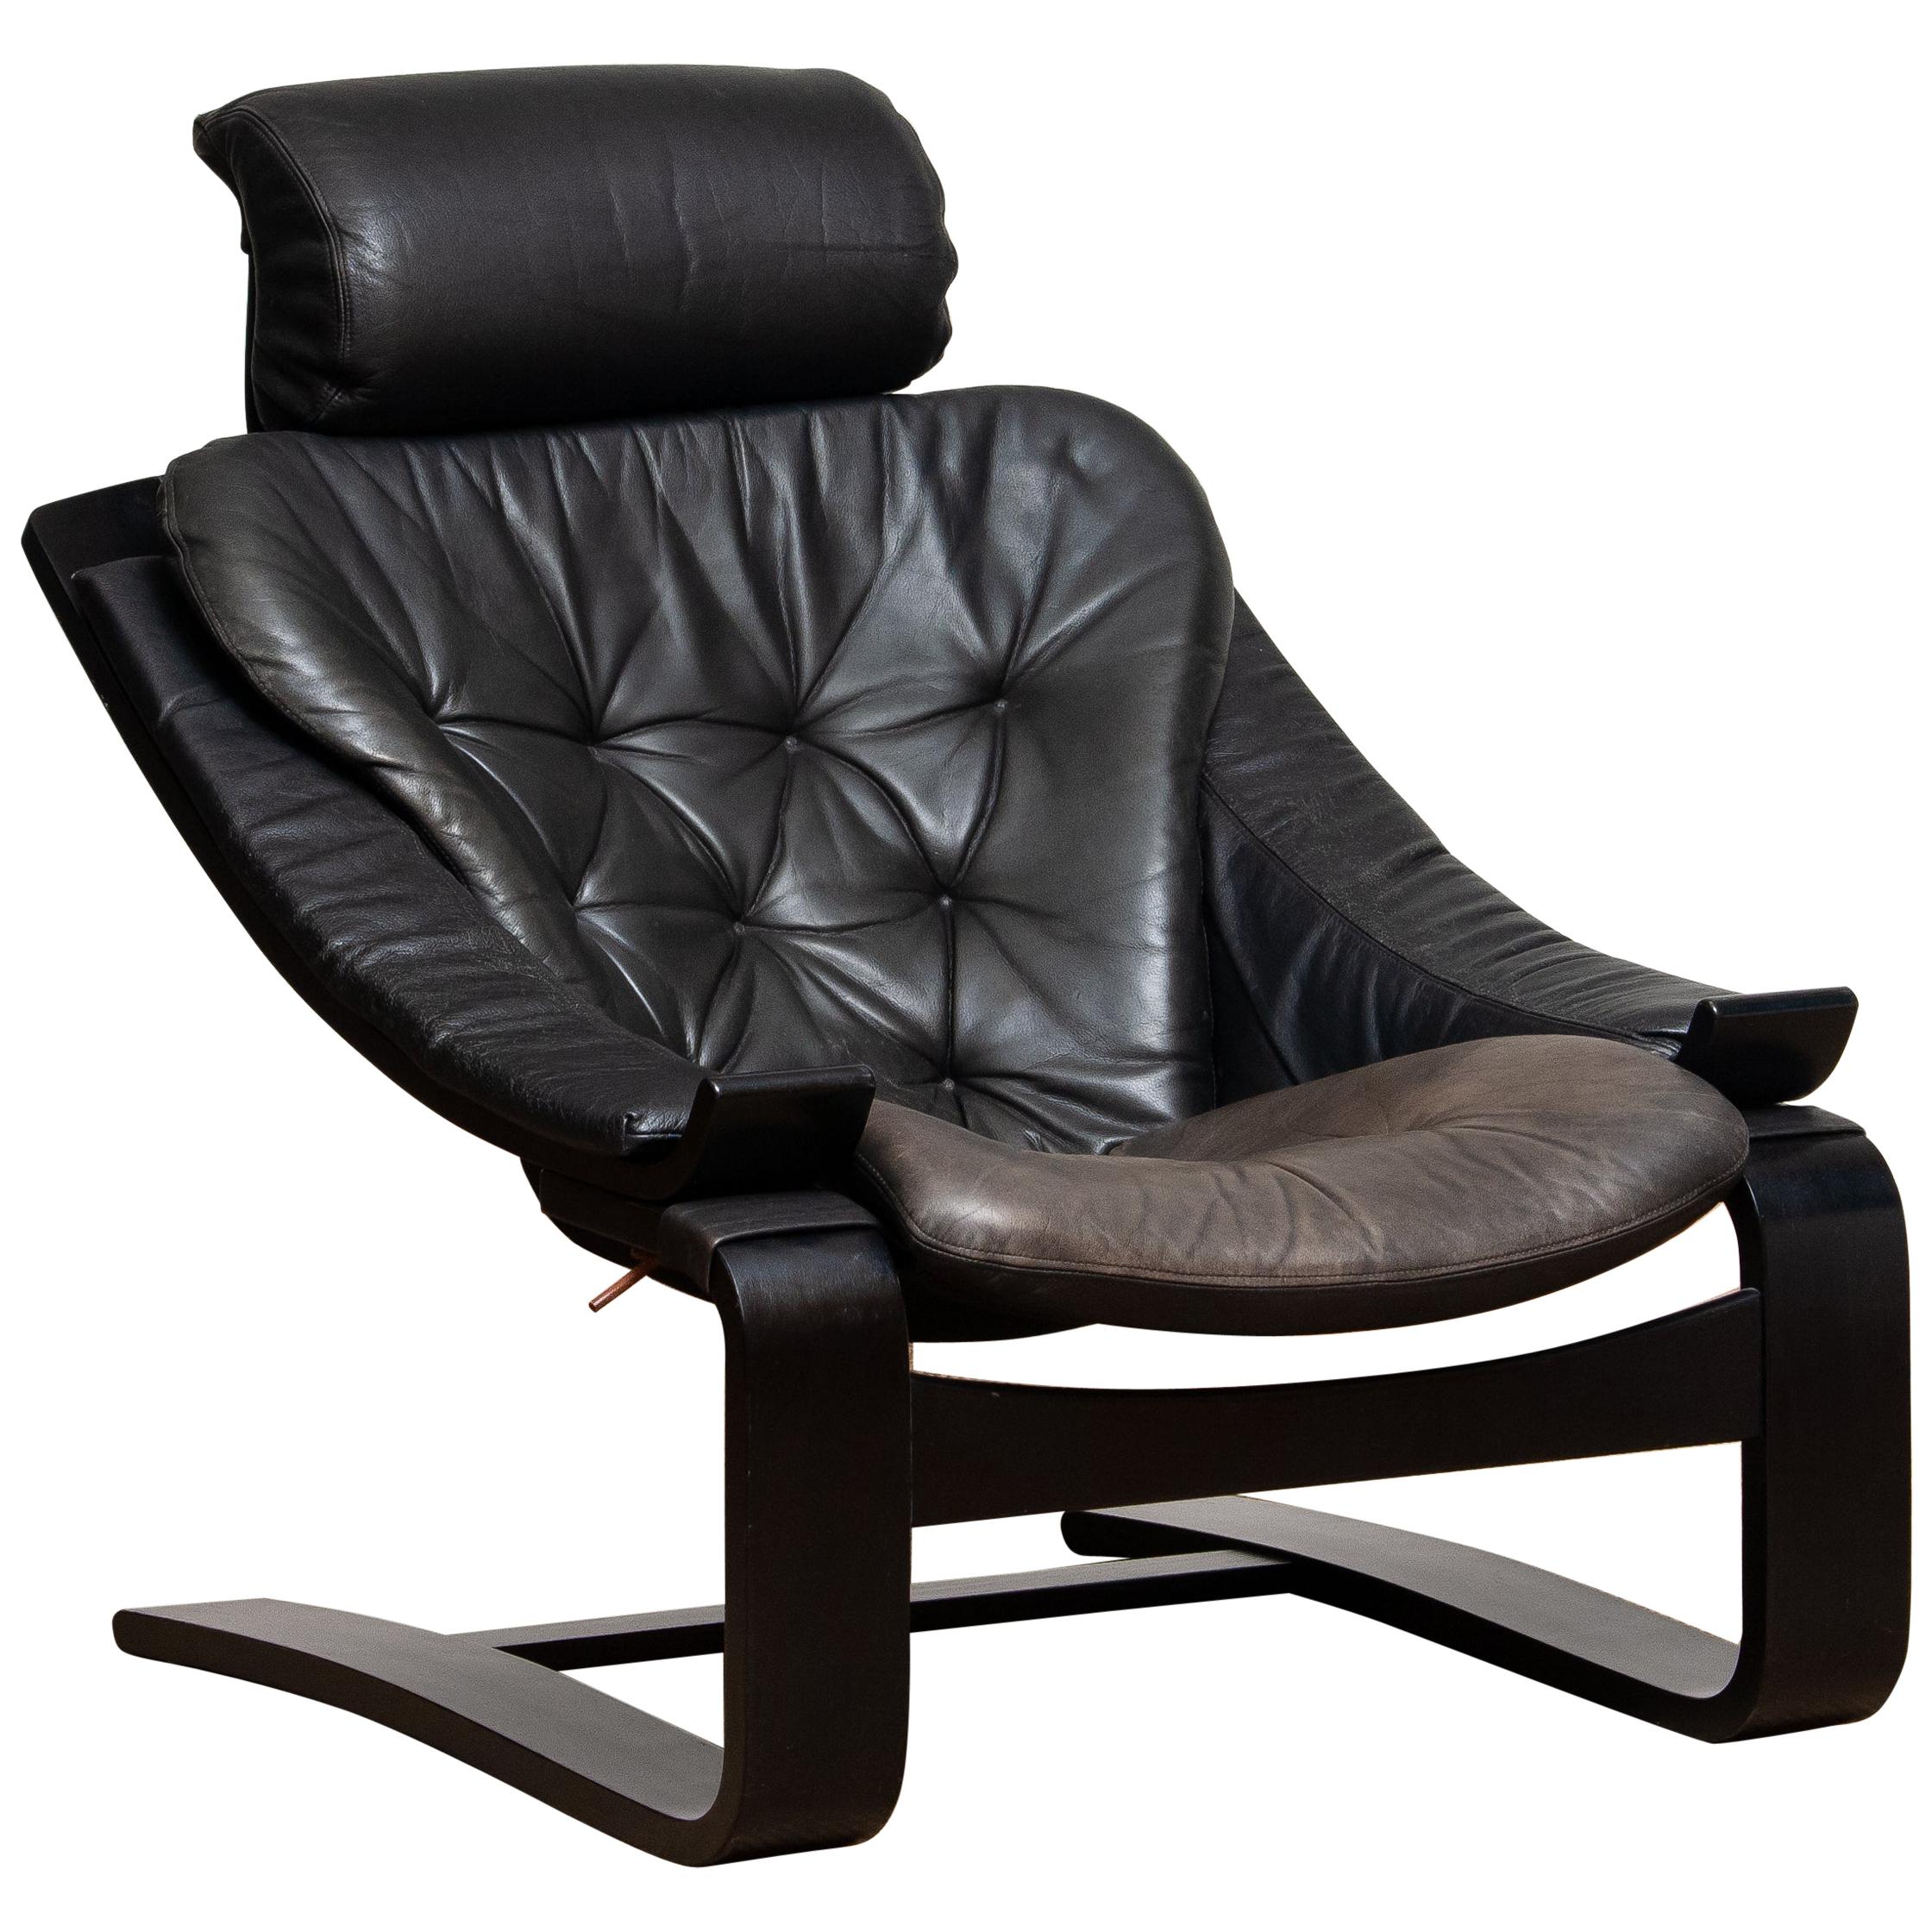 Swedish 1970s, Black Kroken Lounge Chair by Ake Fribytter for Nelo Sweden in Leather